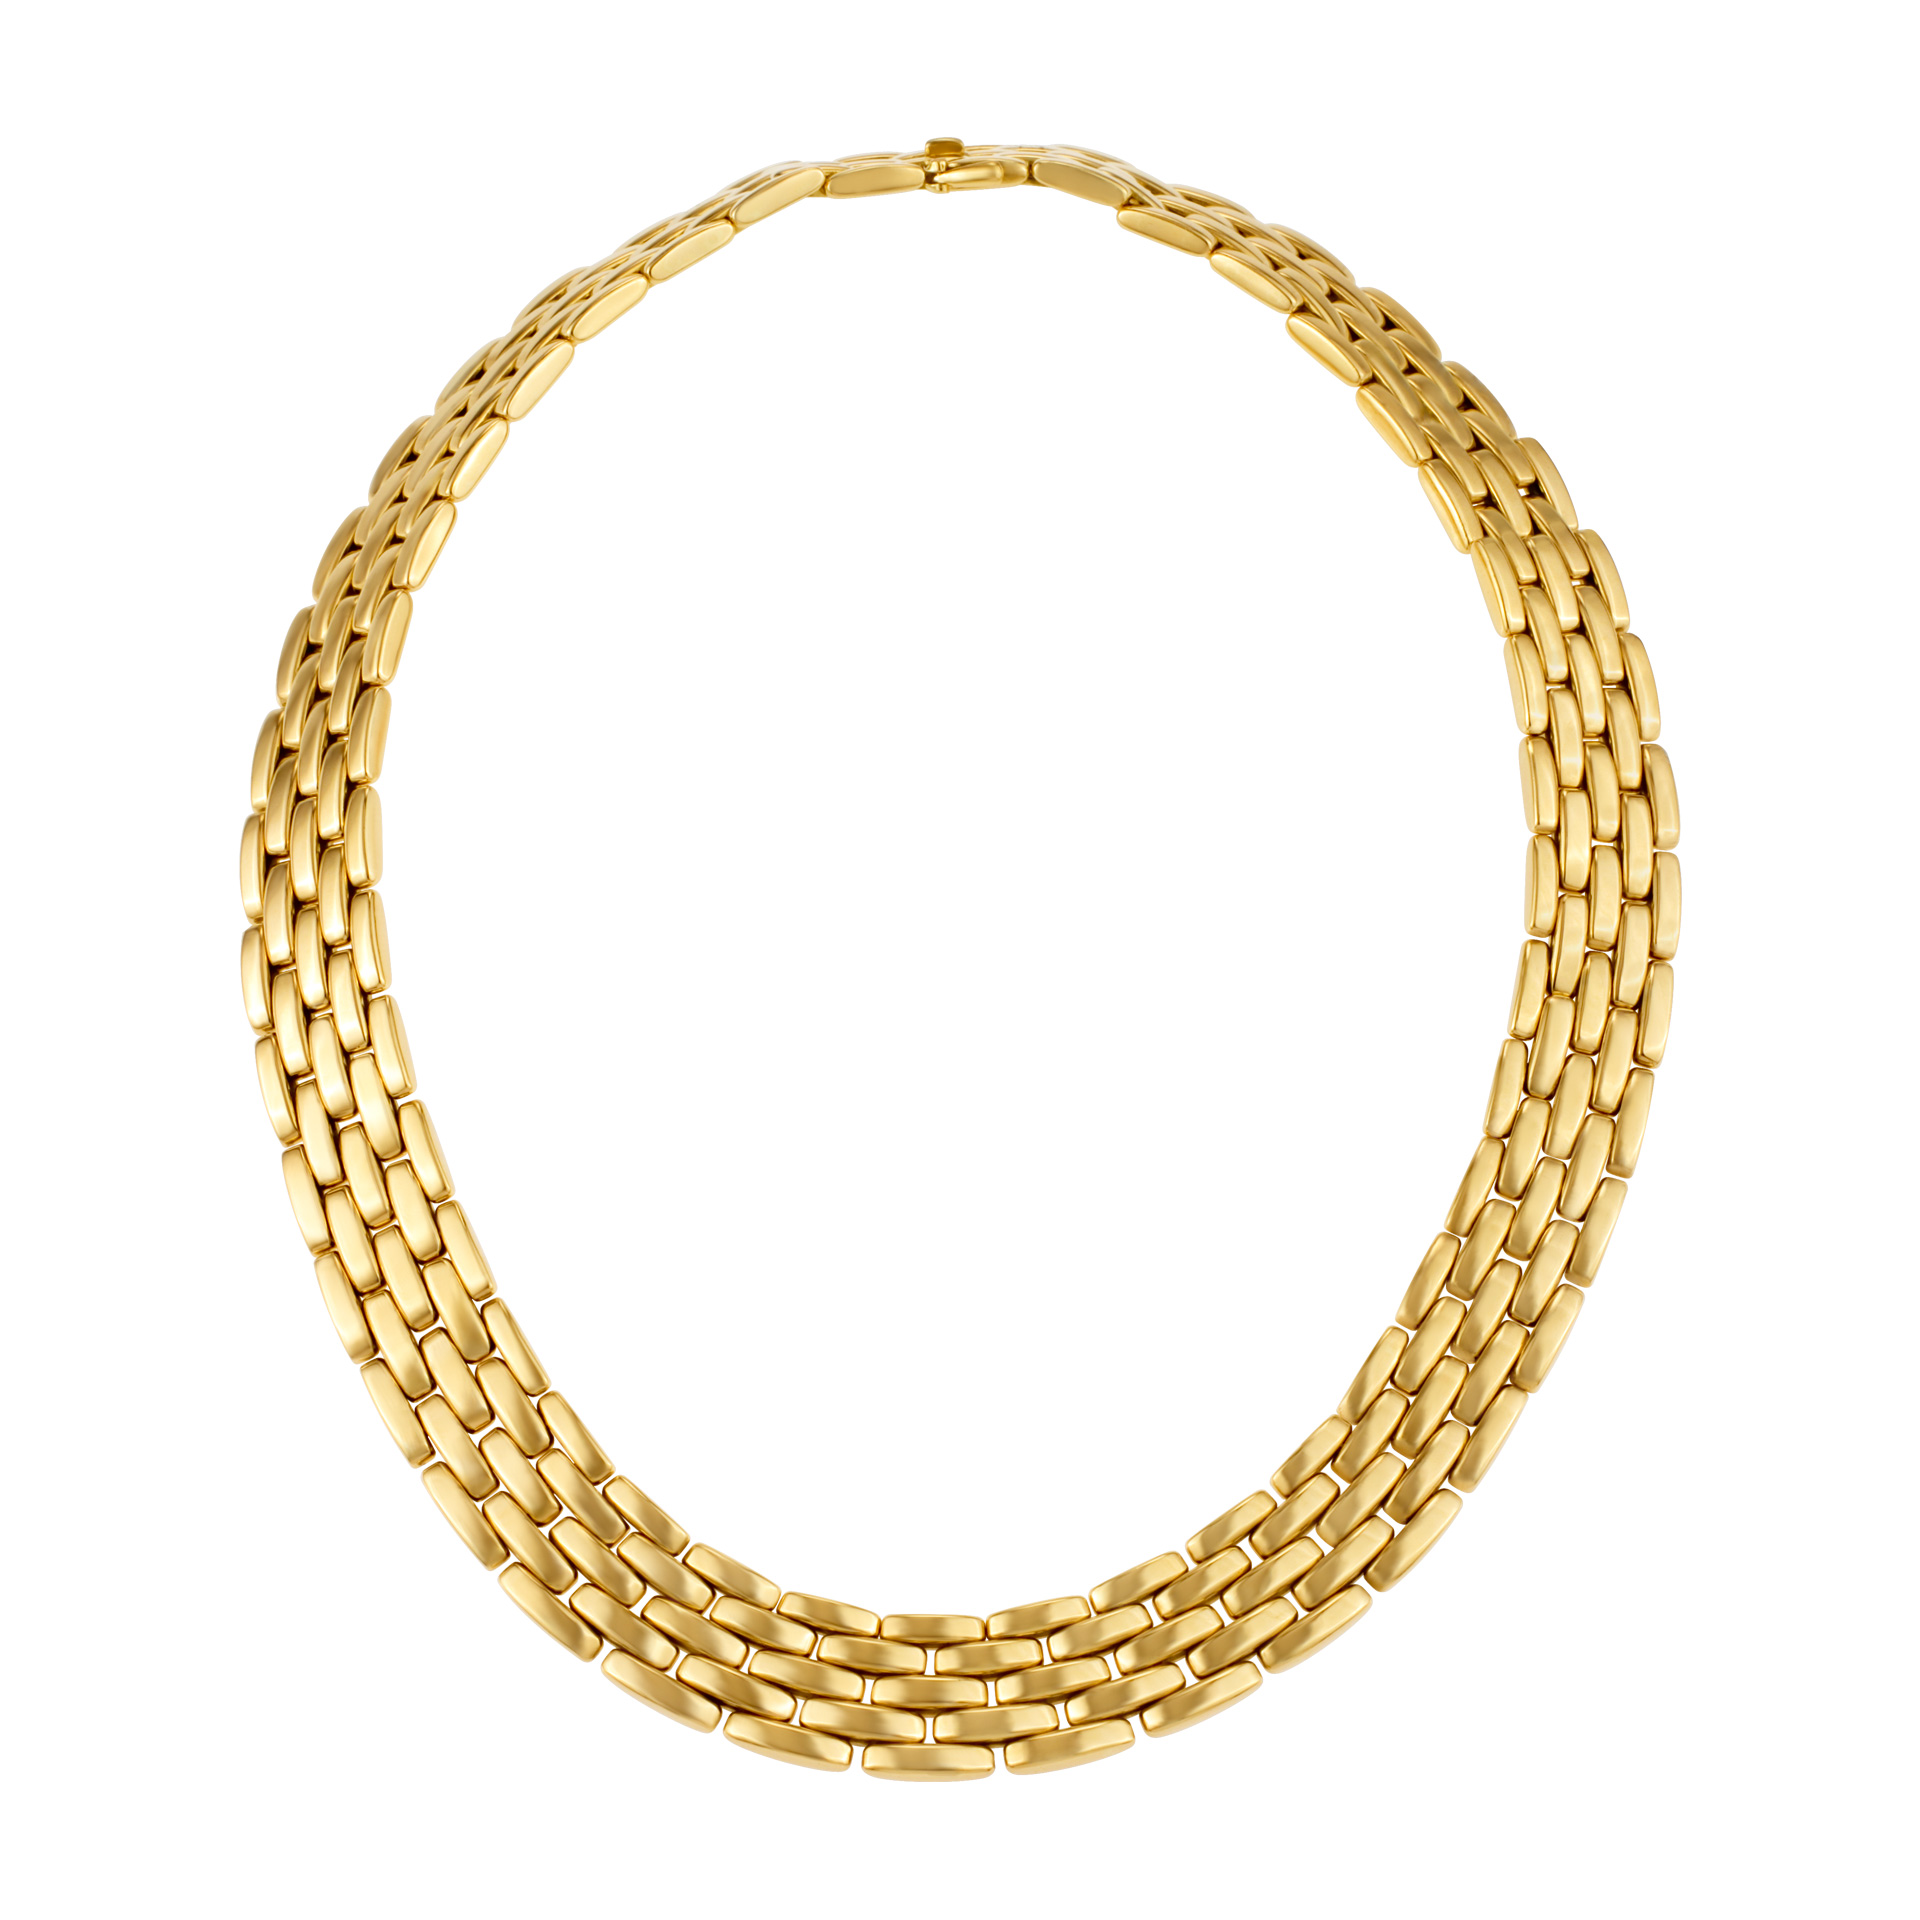 Cartier Panthere necklace in 18k image 1